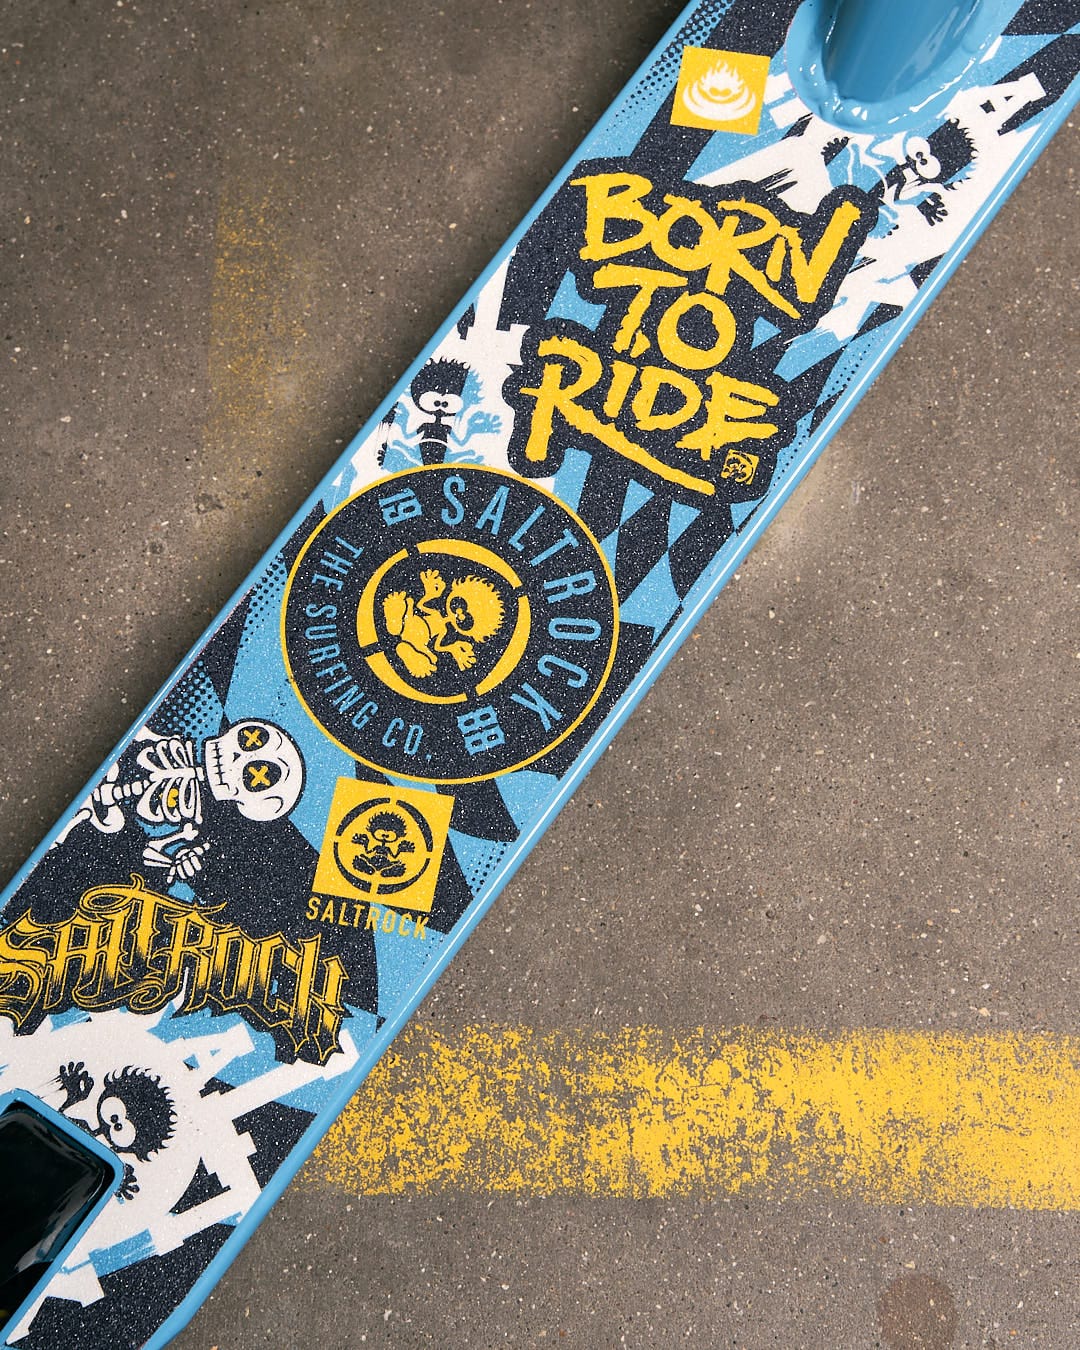 A Warped - Stunt Scooter - Blue with the words born to ride on it, made by Saltrock.